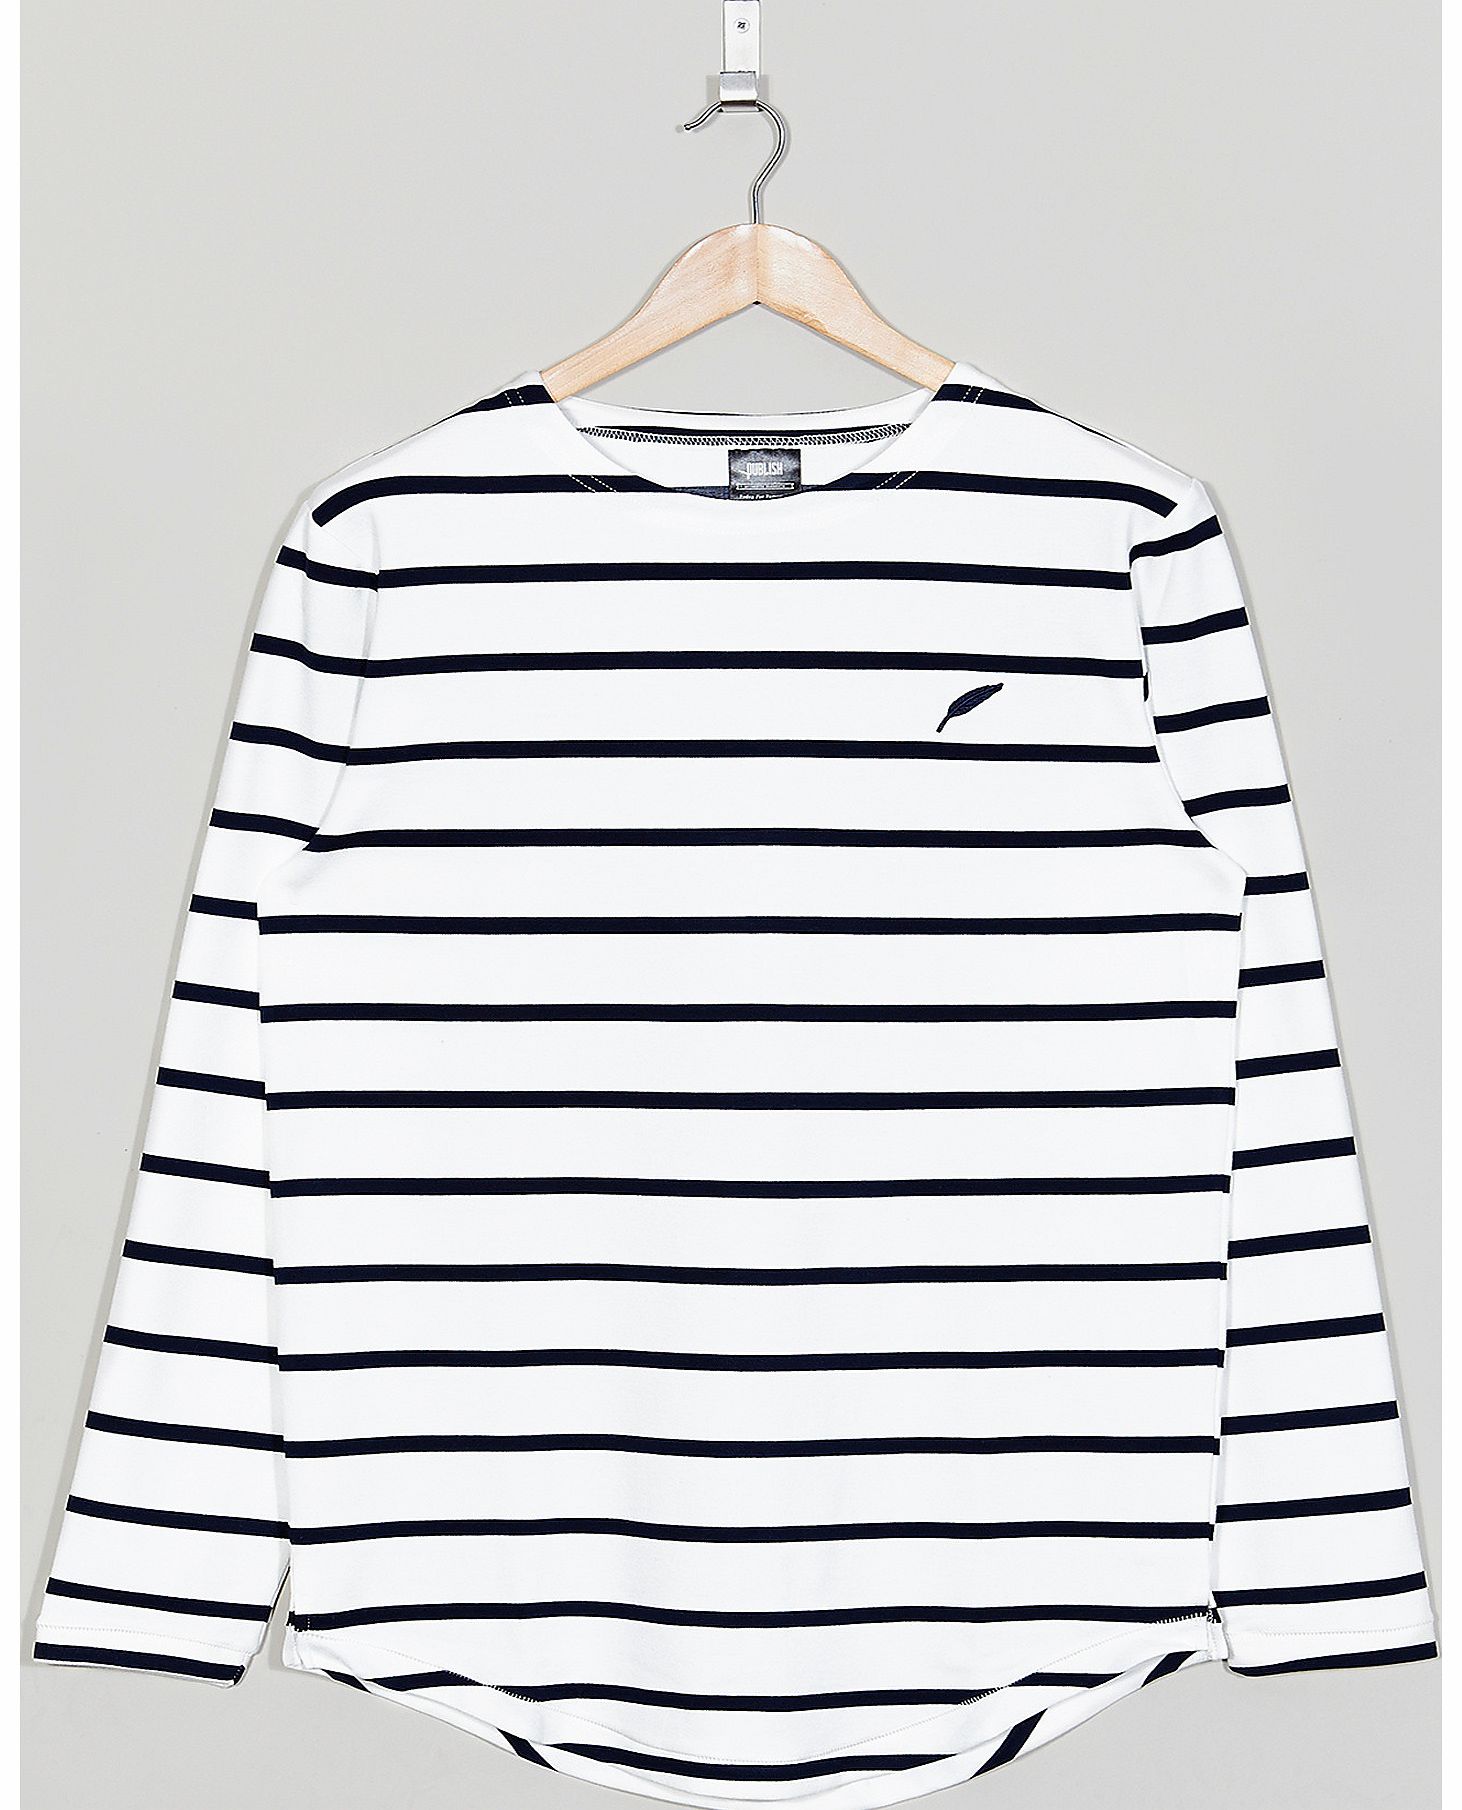 Publish Dover Long Sleeve Striped T-Shirt